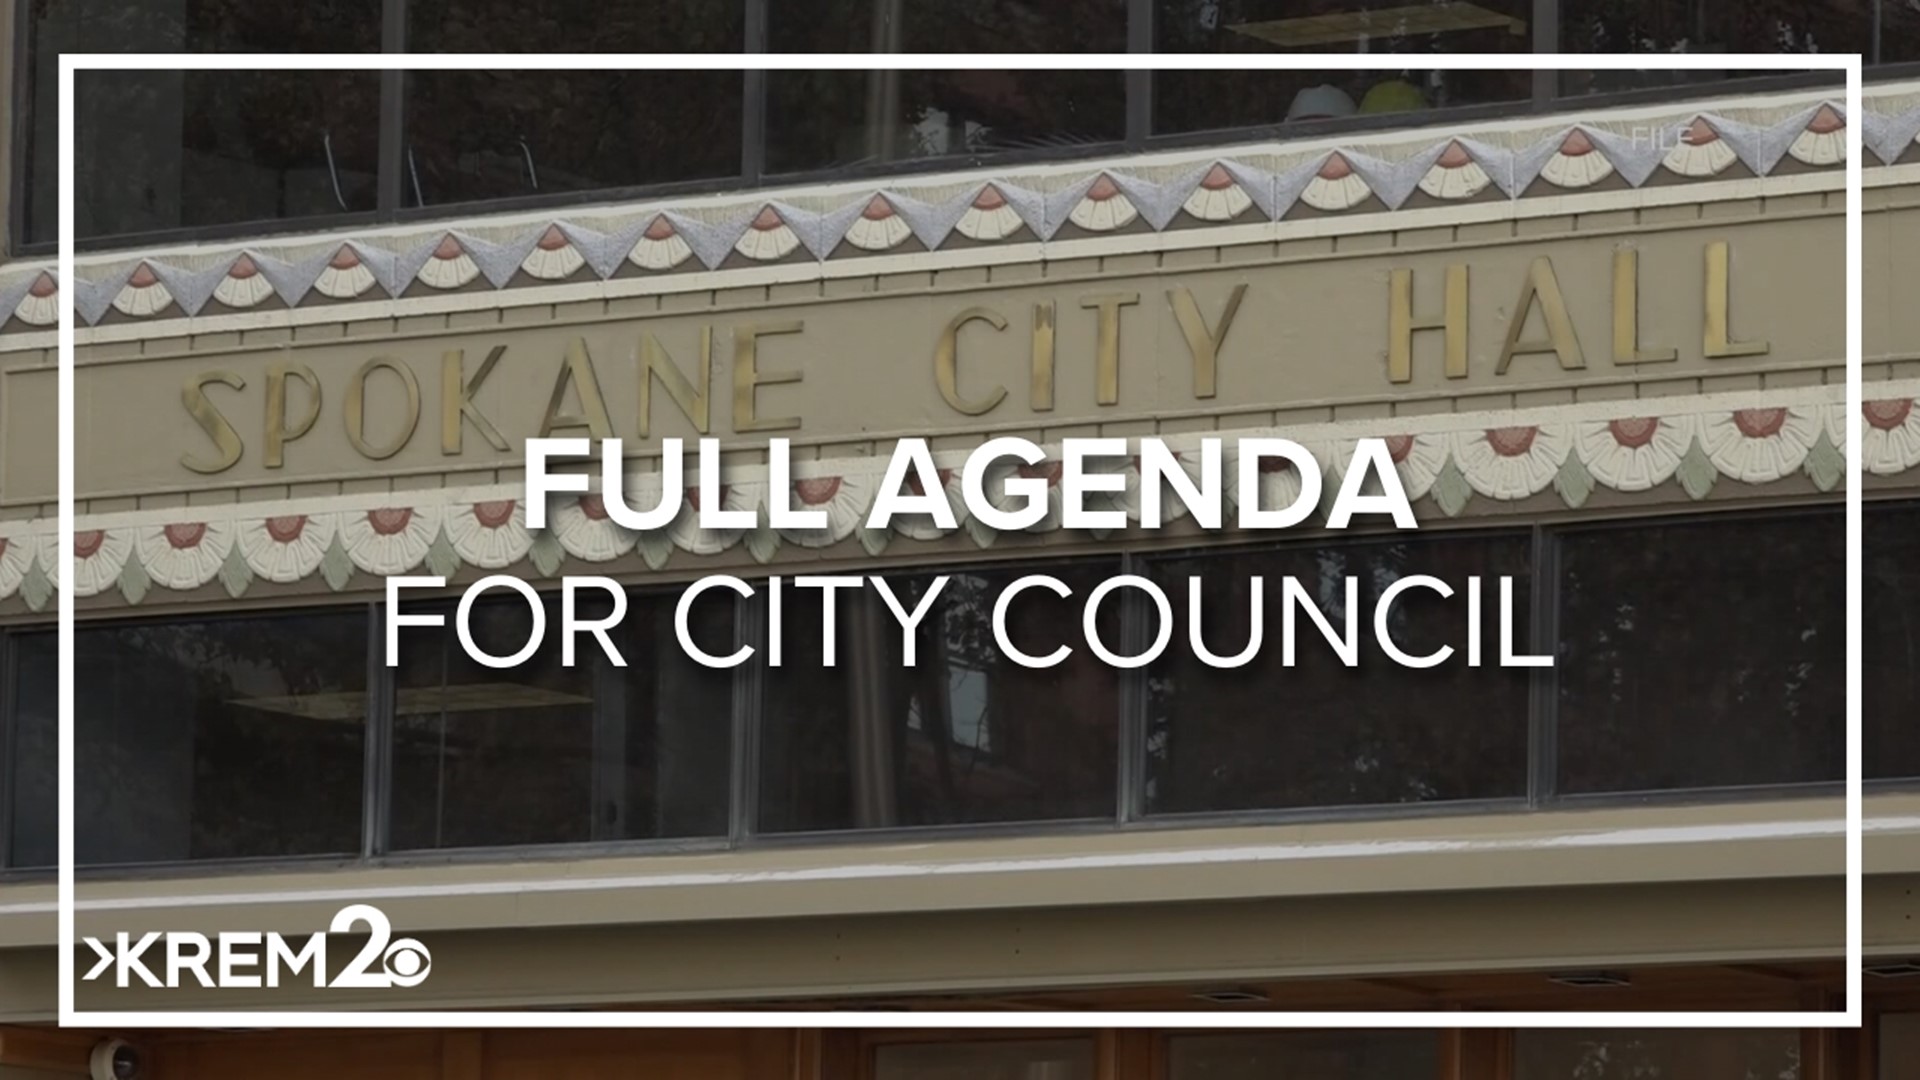 The Spokane City Council is discussing a full agenda at 6 p.m.